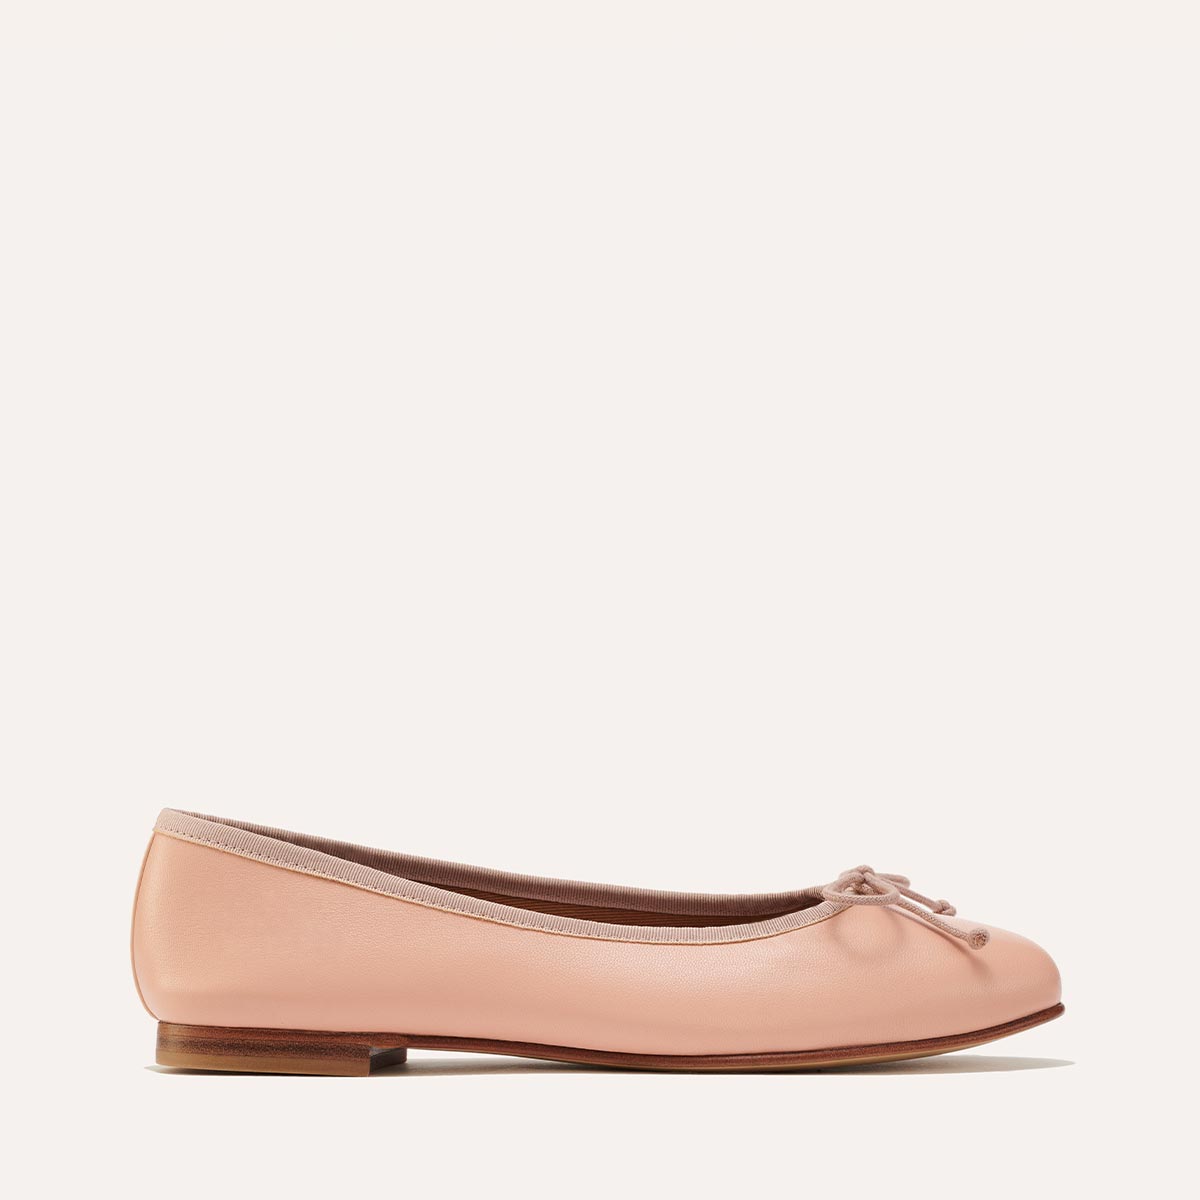 The Demi - Ballet Pink Nappa